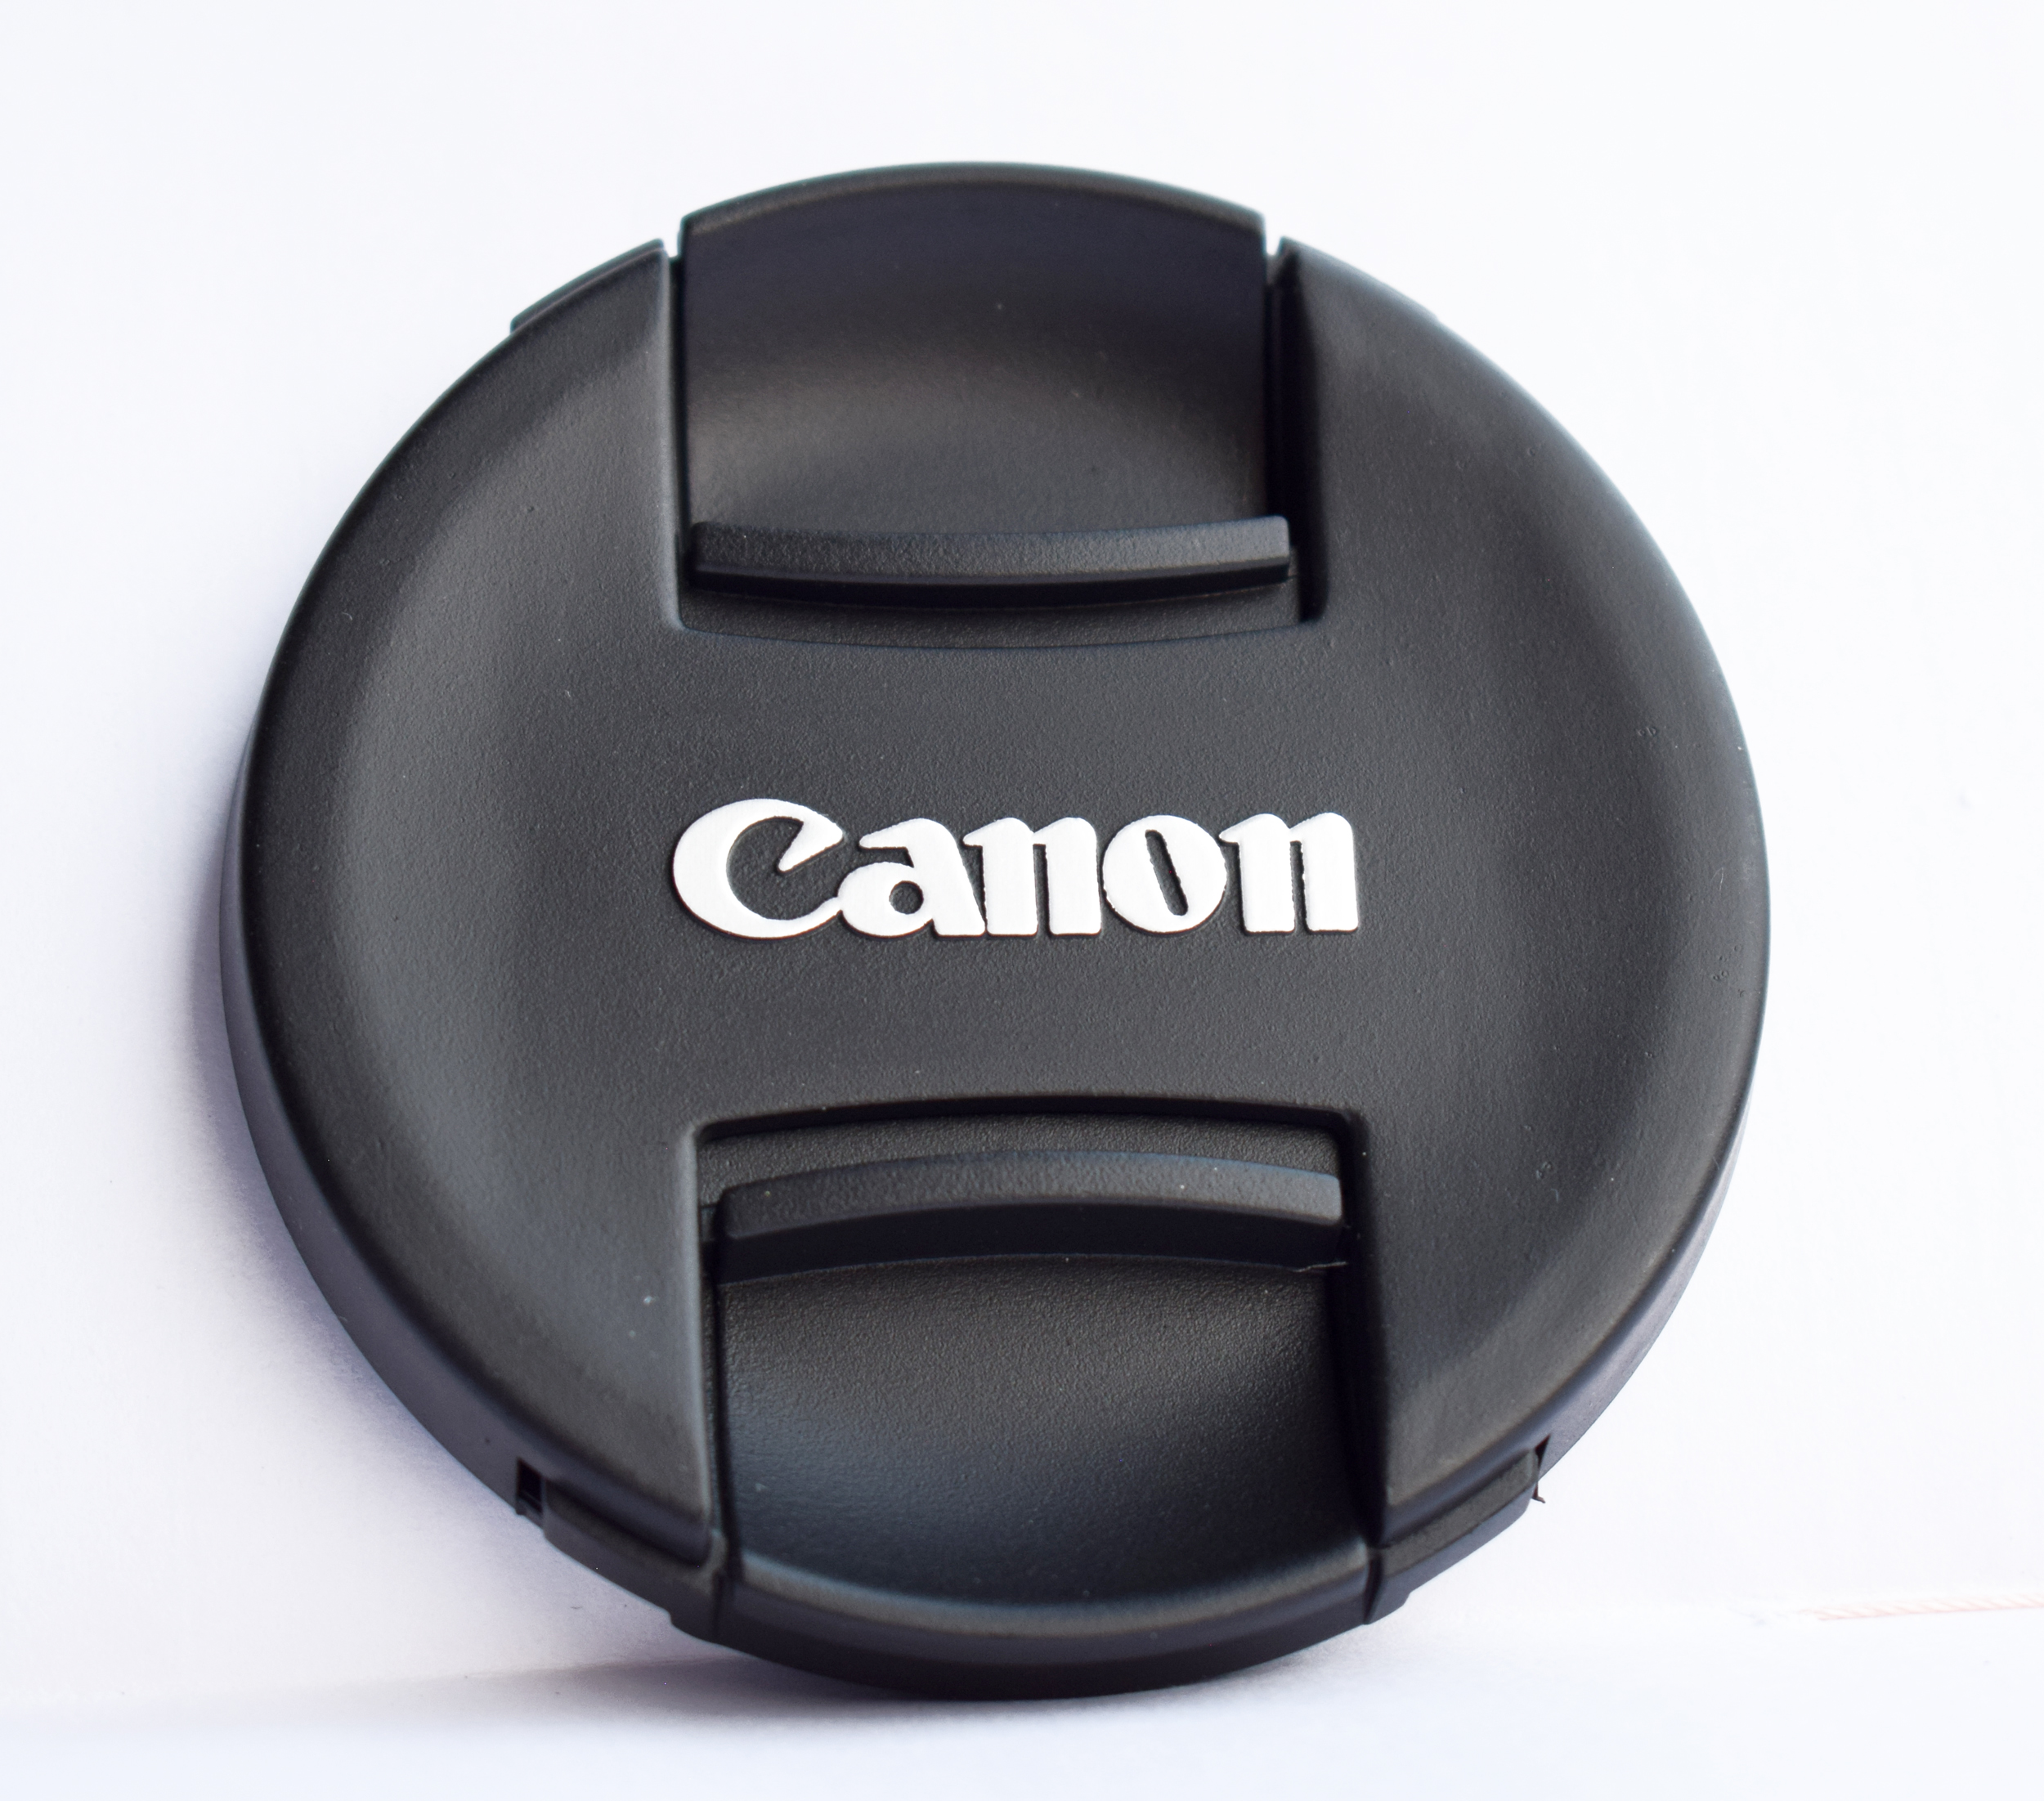 Replacement lens cap for 77mm front threaded canon lenses